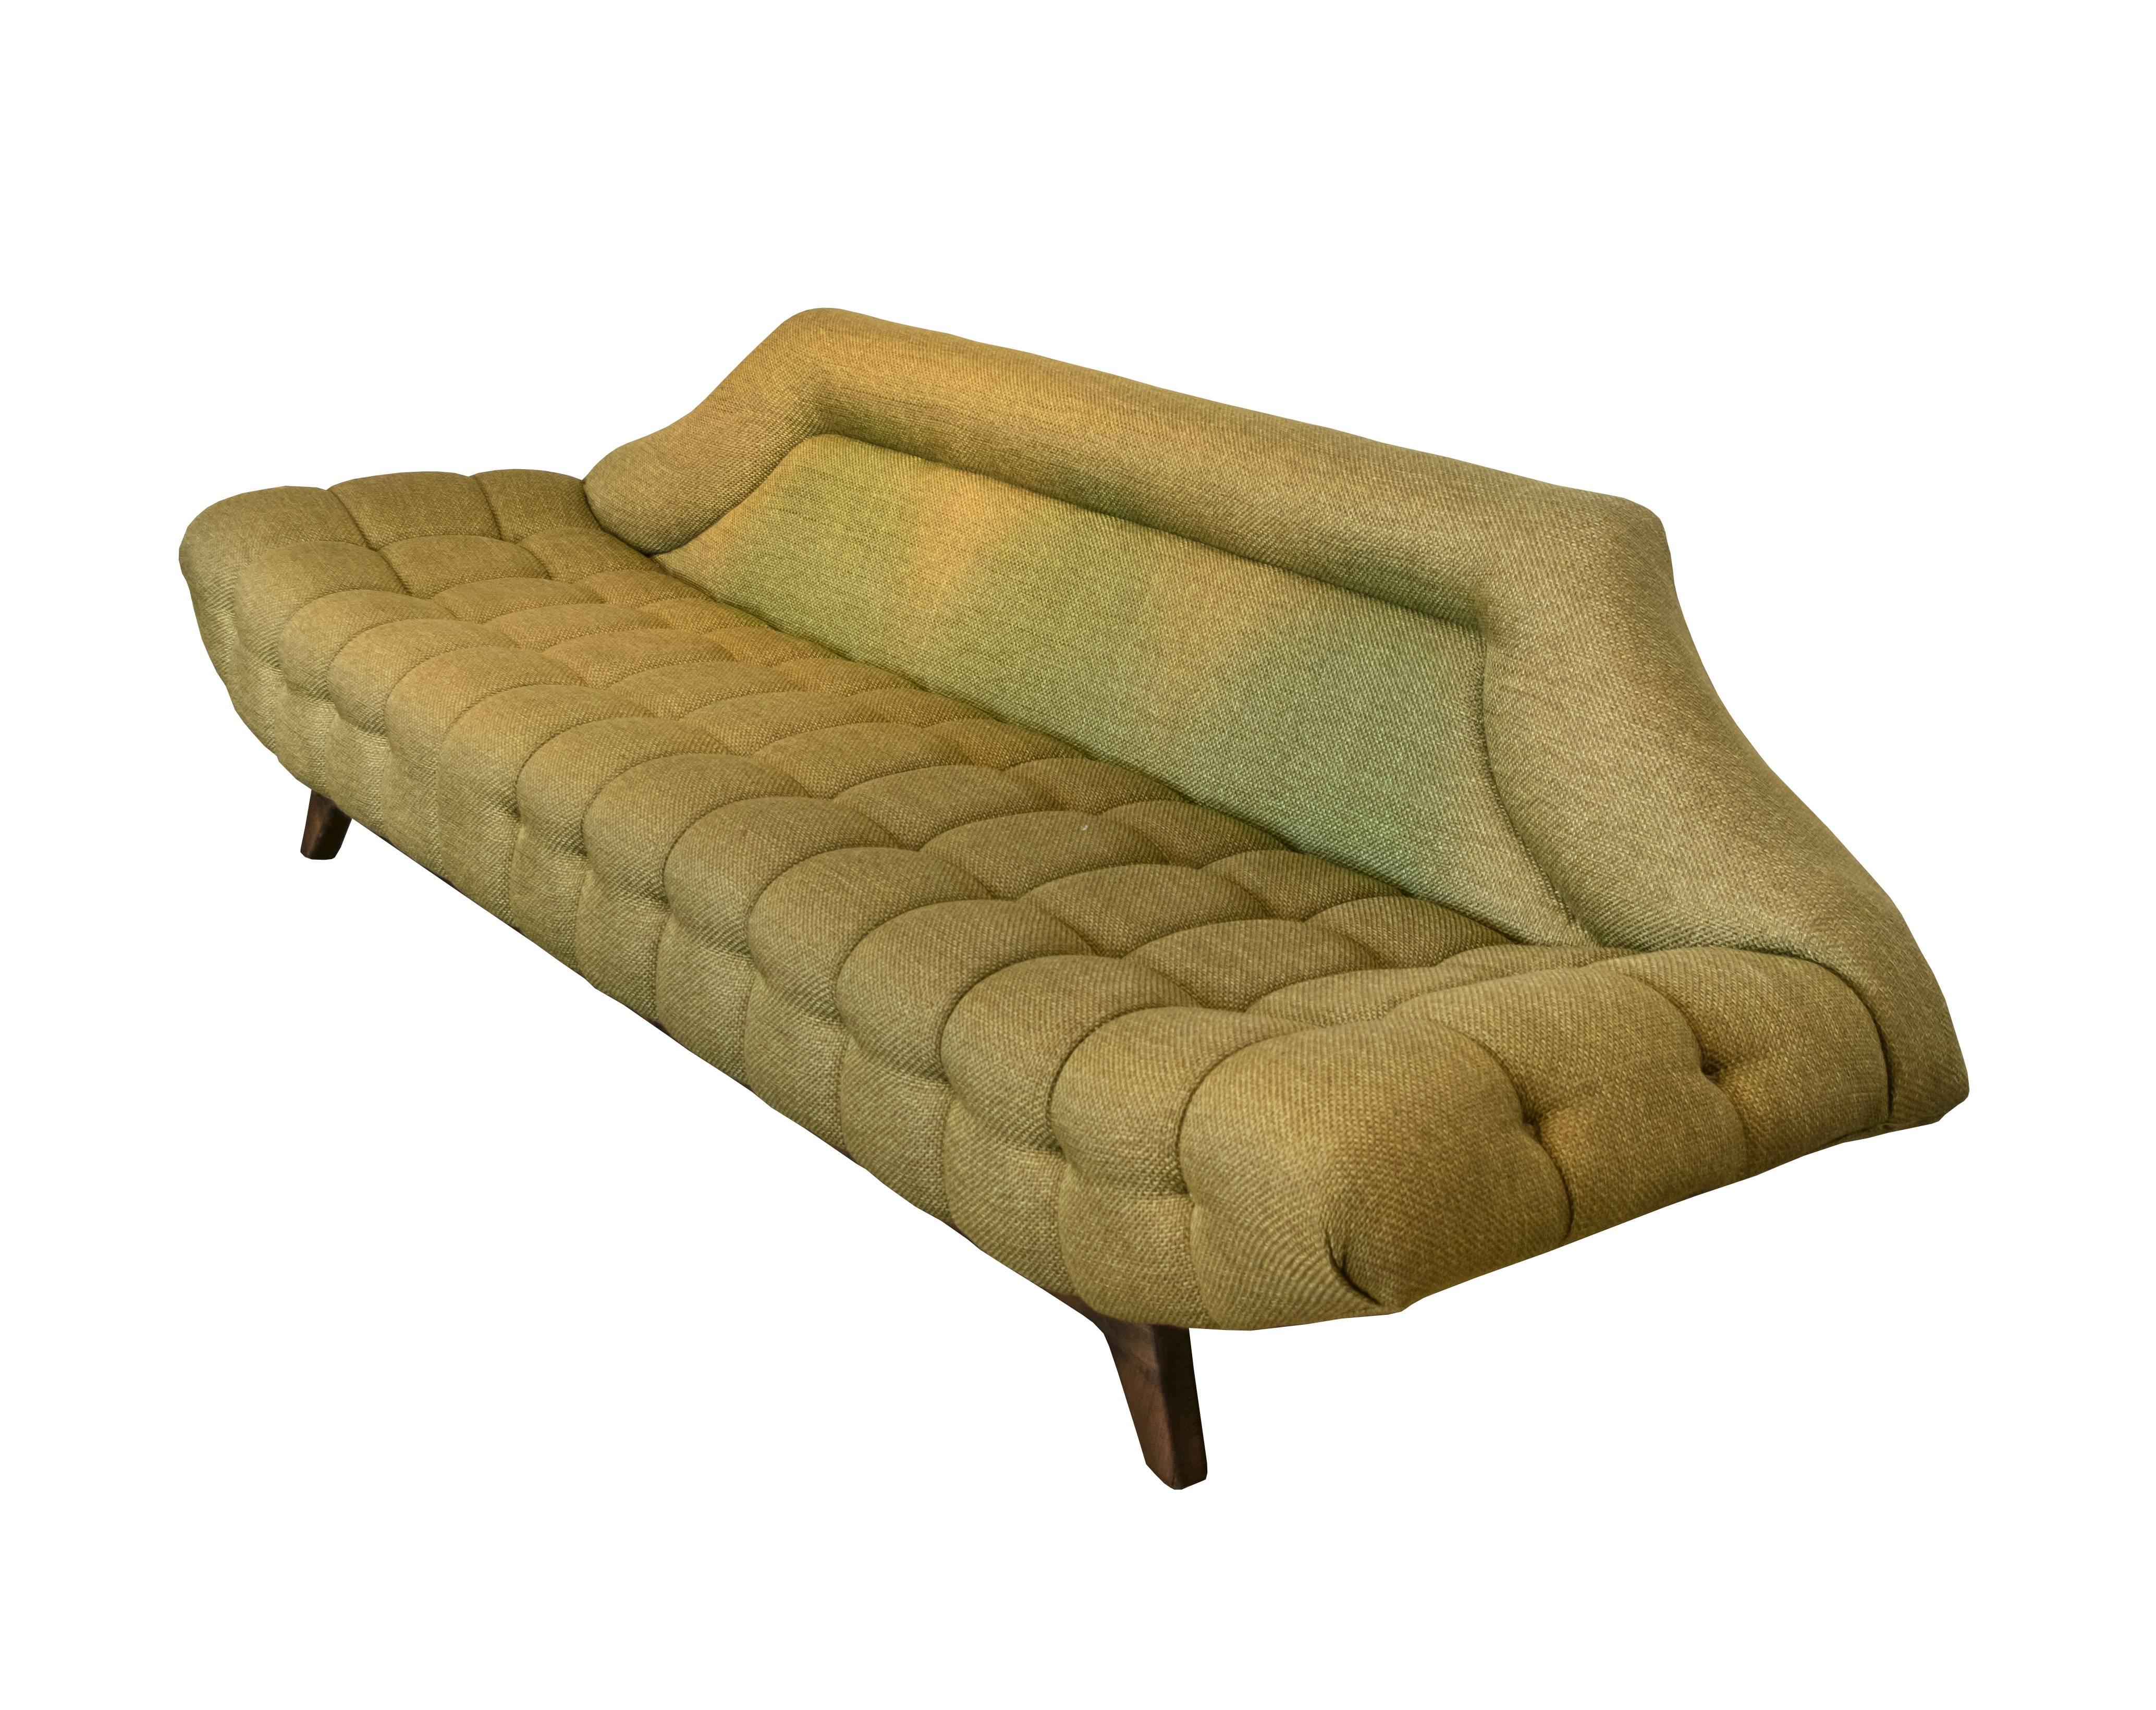 Highly sculptural gondola sofa by Adrian Pearsall in the original fabric that needs reupholstering. Extensive biscuit tufting. We have had several of these sofas before and they look smashing recovered in velvet and/or mohair upholstery.